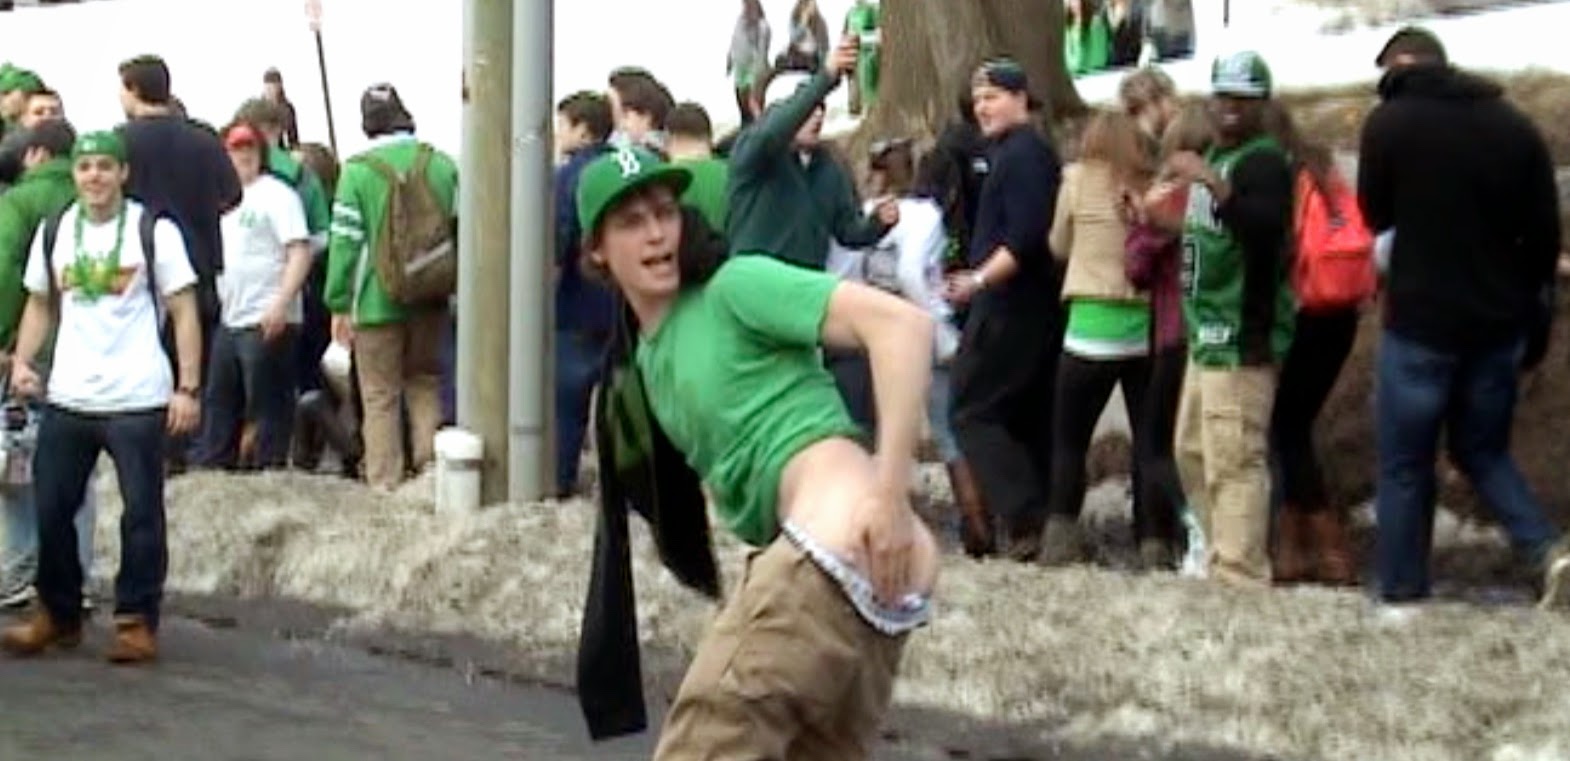 Only in The Republic of Amherst Blarney Blowout Caught On Tape